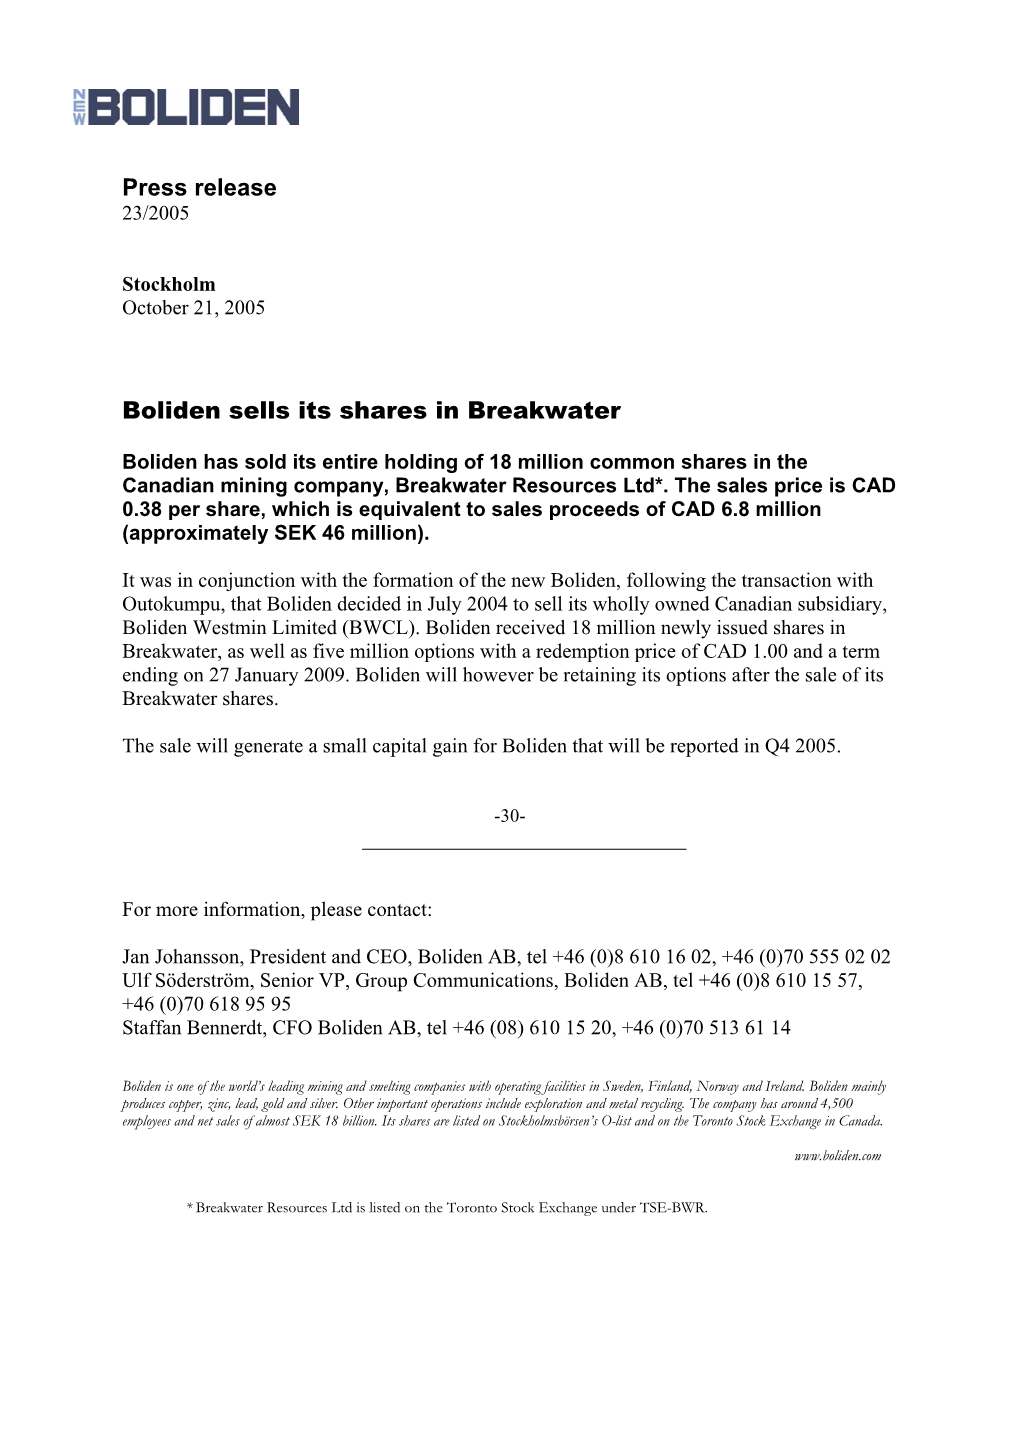 Press Release Boliden Sells Its Shares in Breakwater